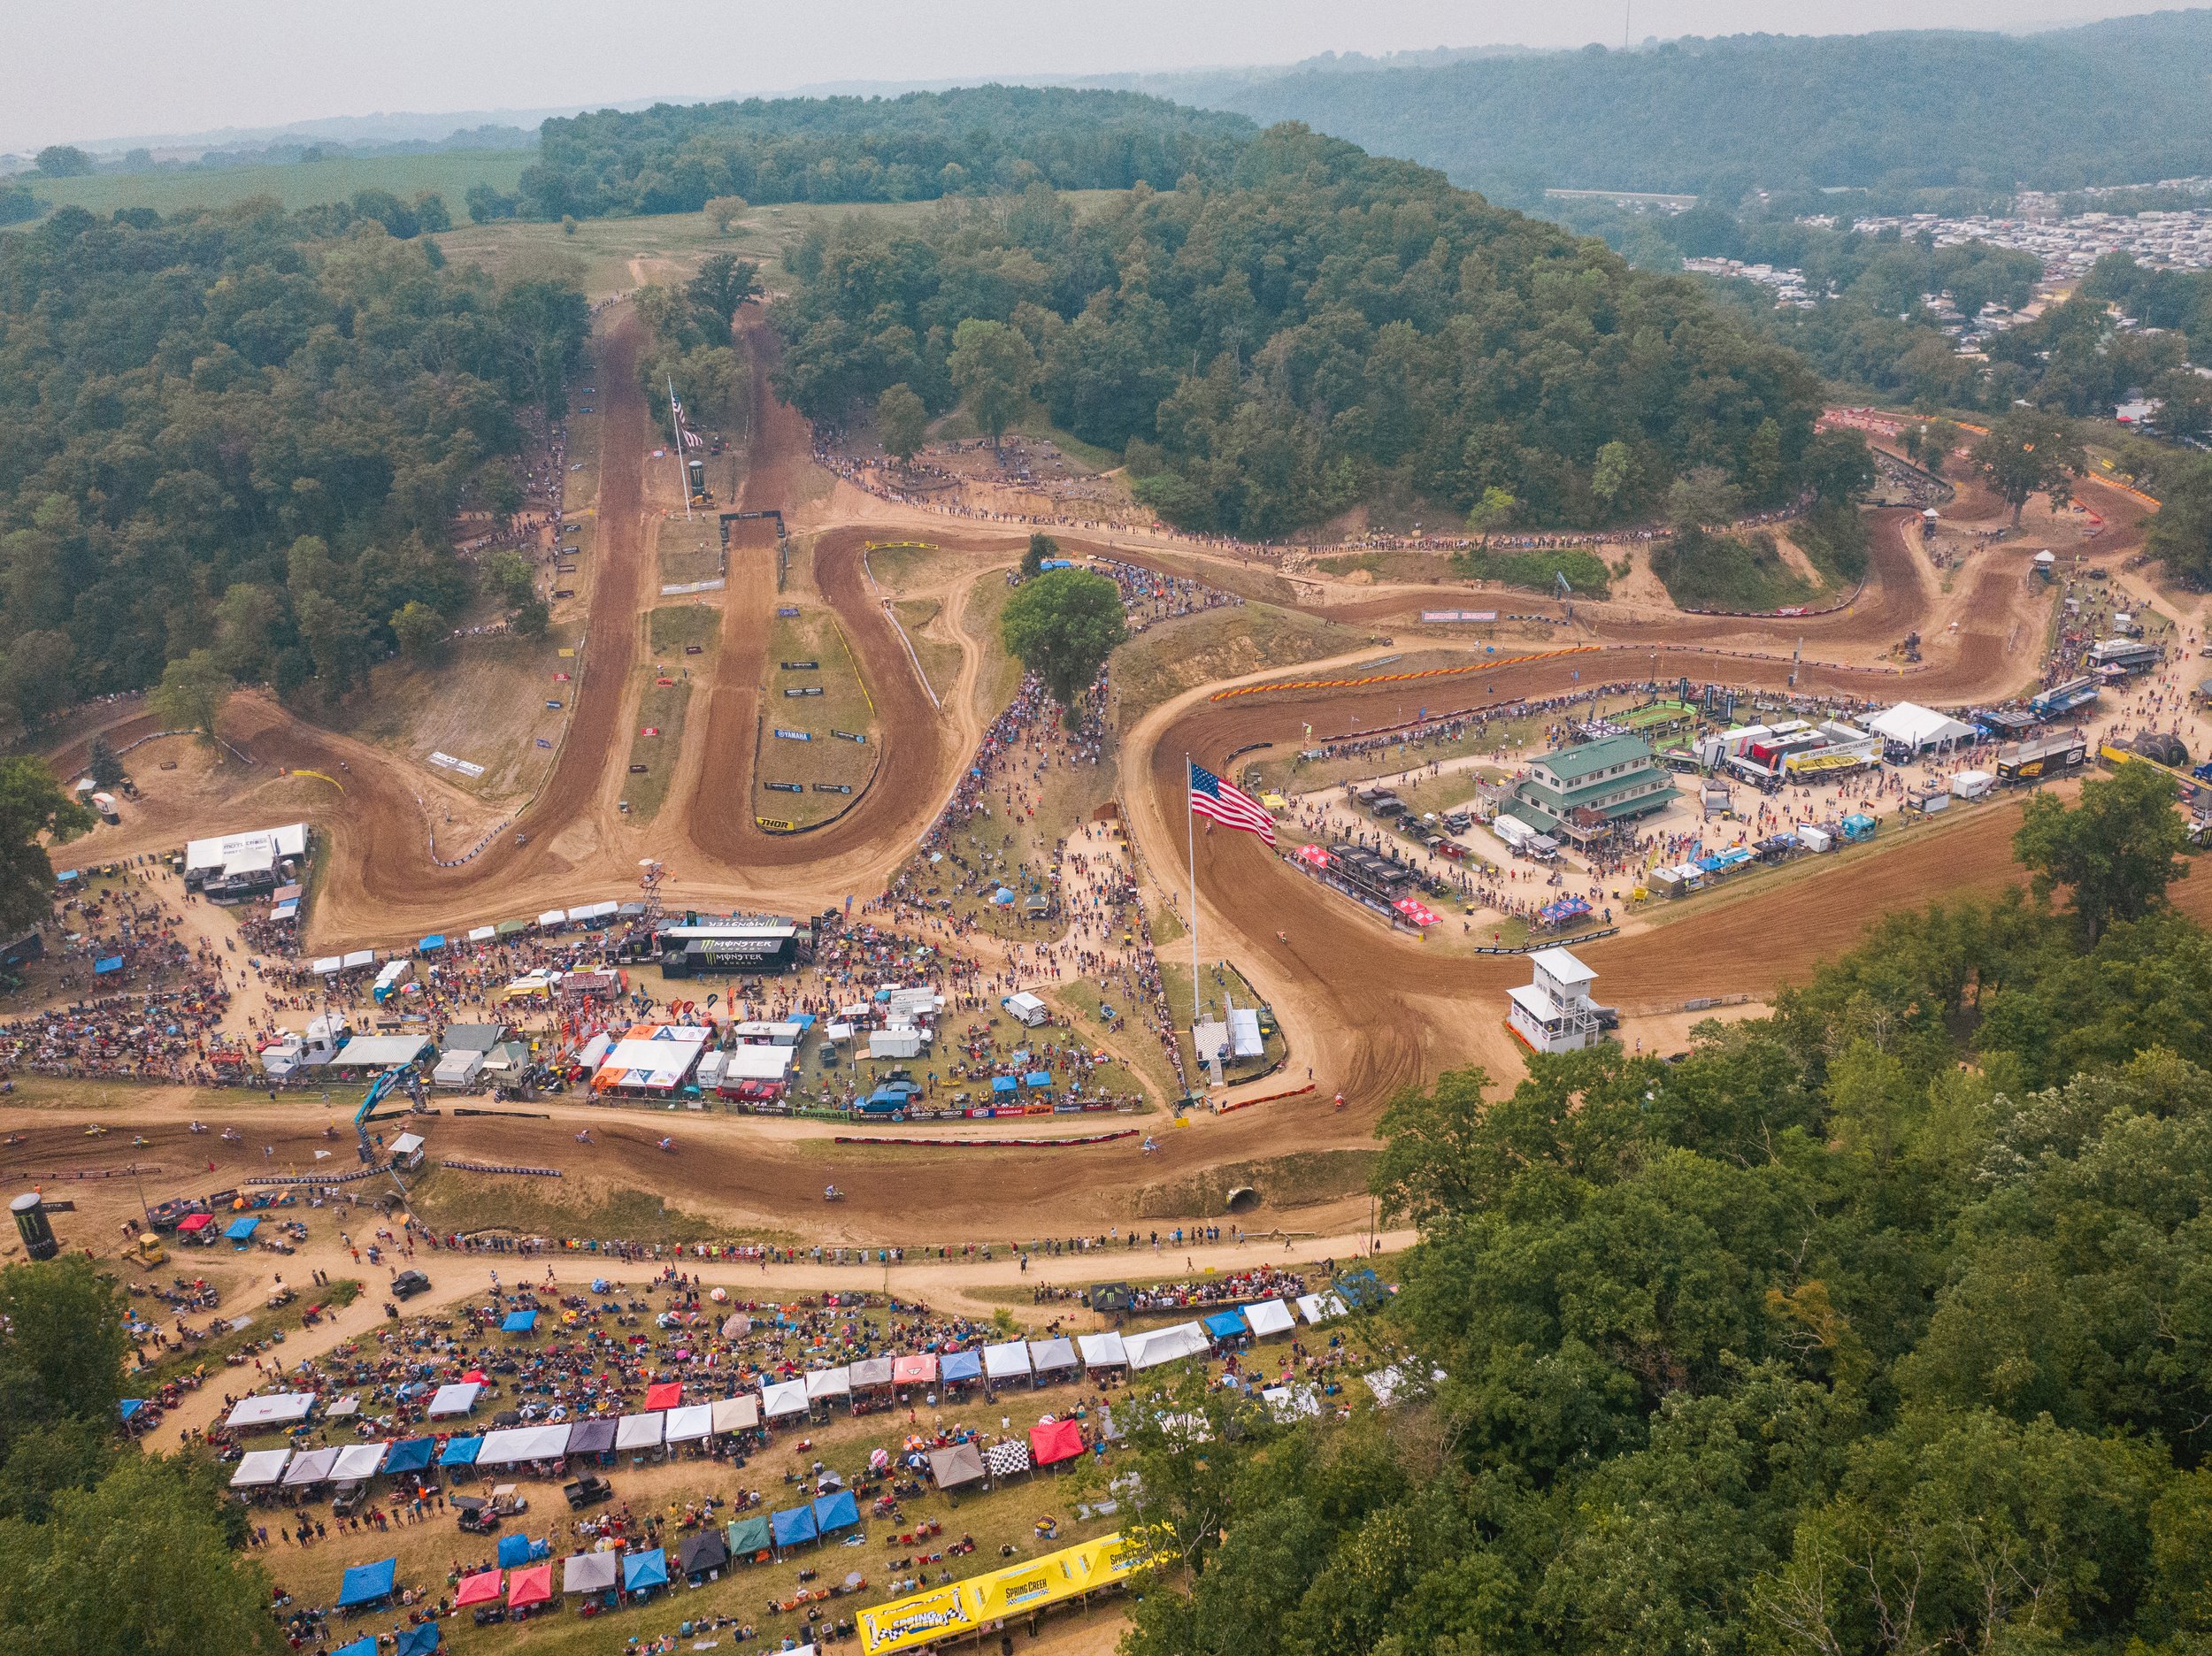 Spring Creek Motocross Park in Millville, MN Round 7 of the Pro Motocross National Championship